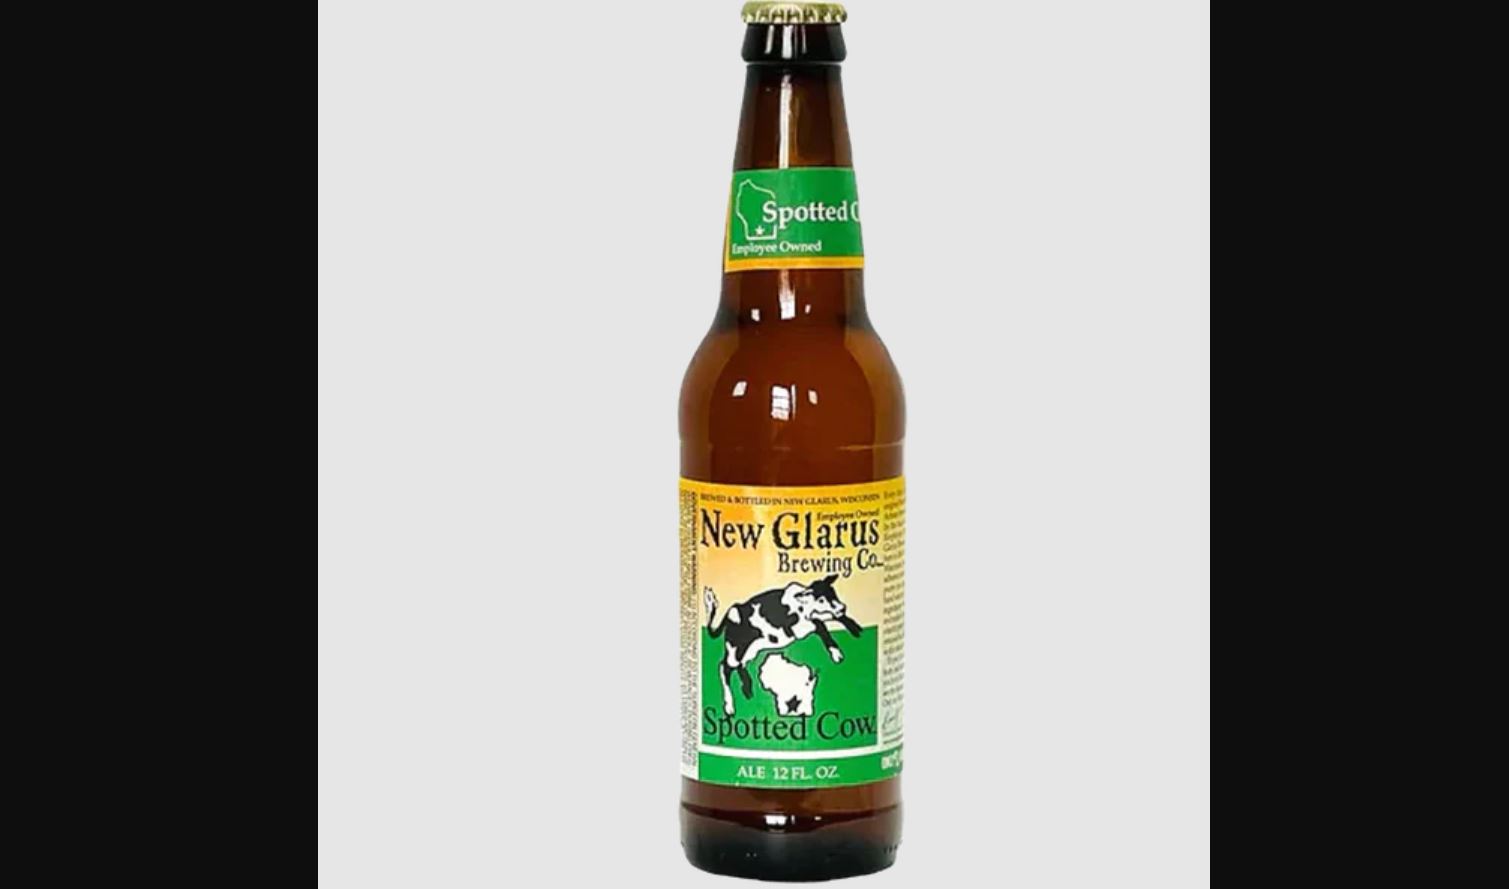 New Glarus Spotted Cow